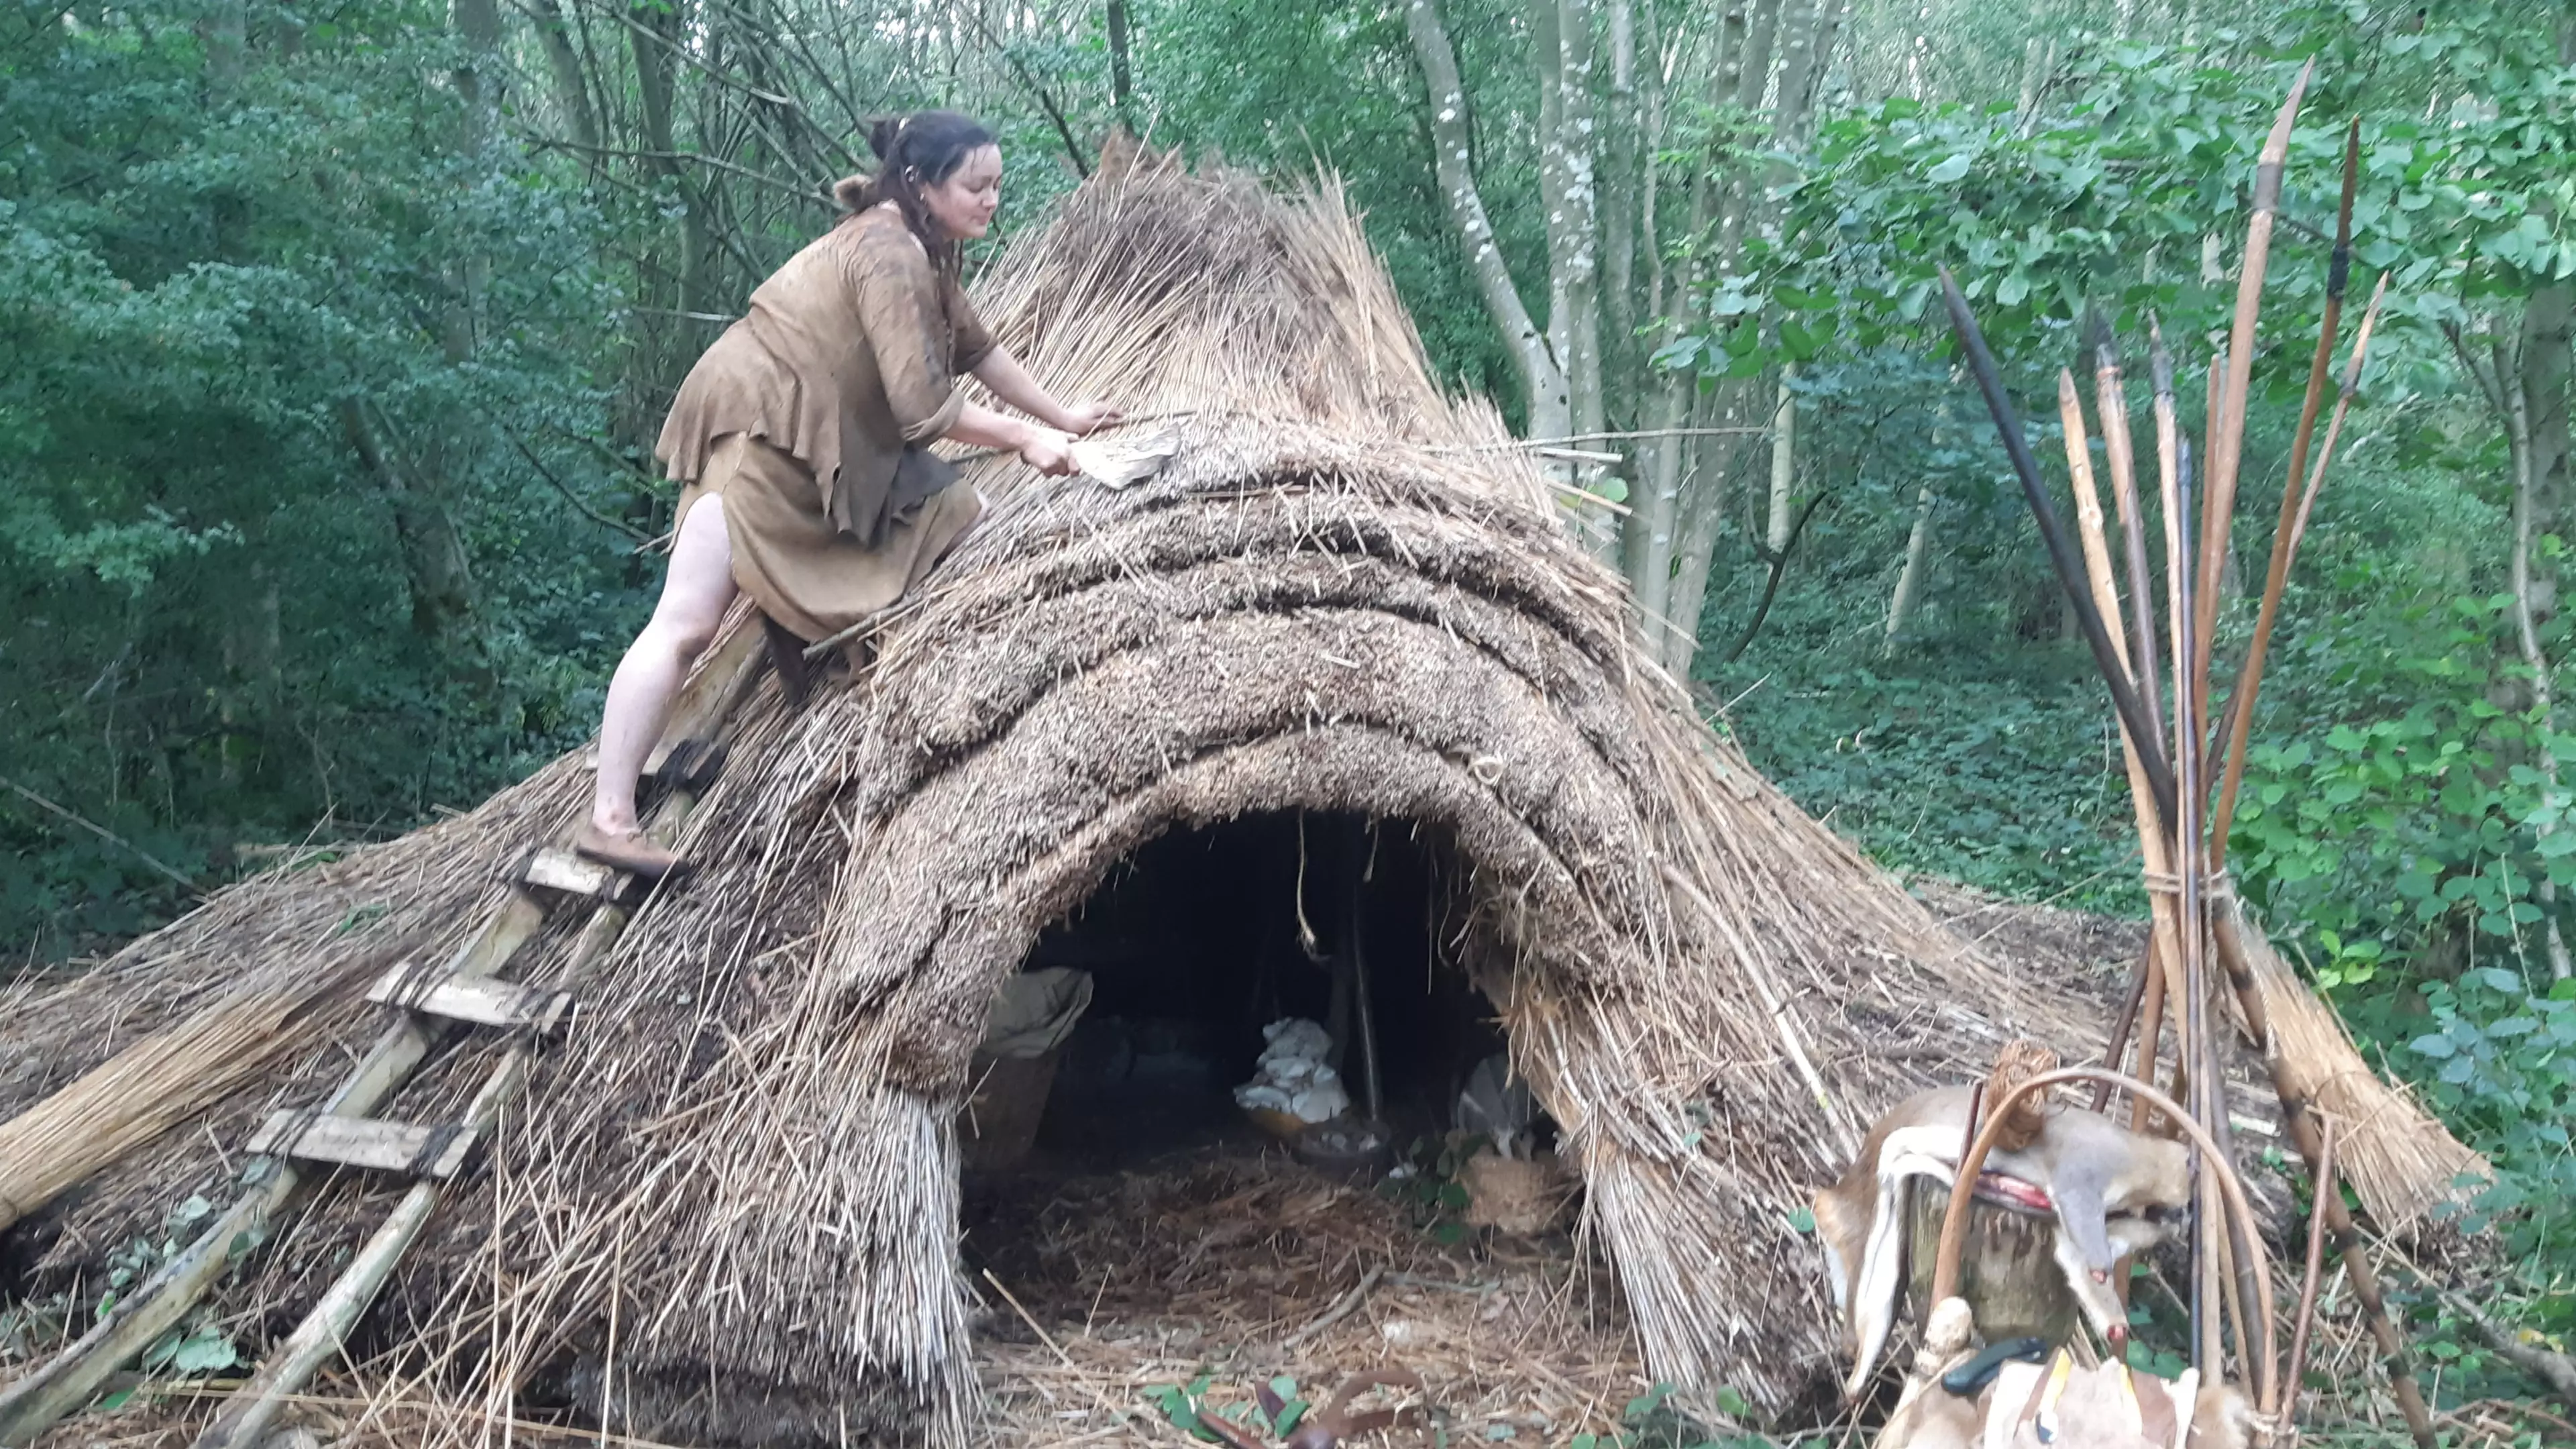 Essex 'Cavewoman' Sleeps In Tent And Eats Roadkill To Survive